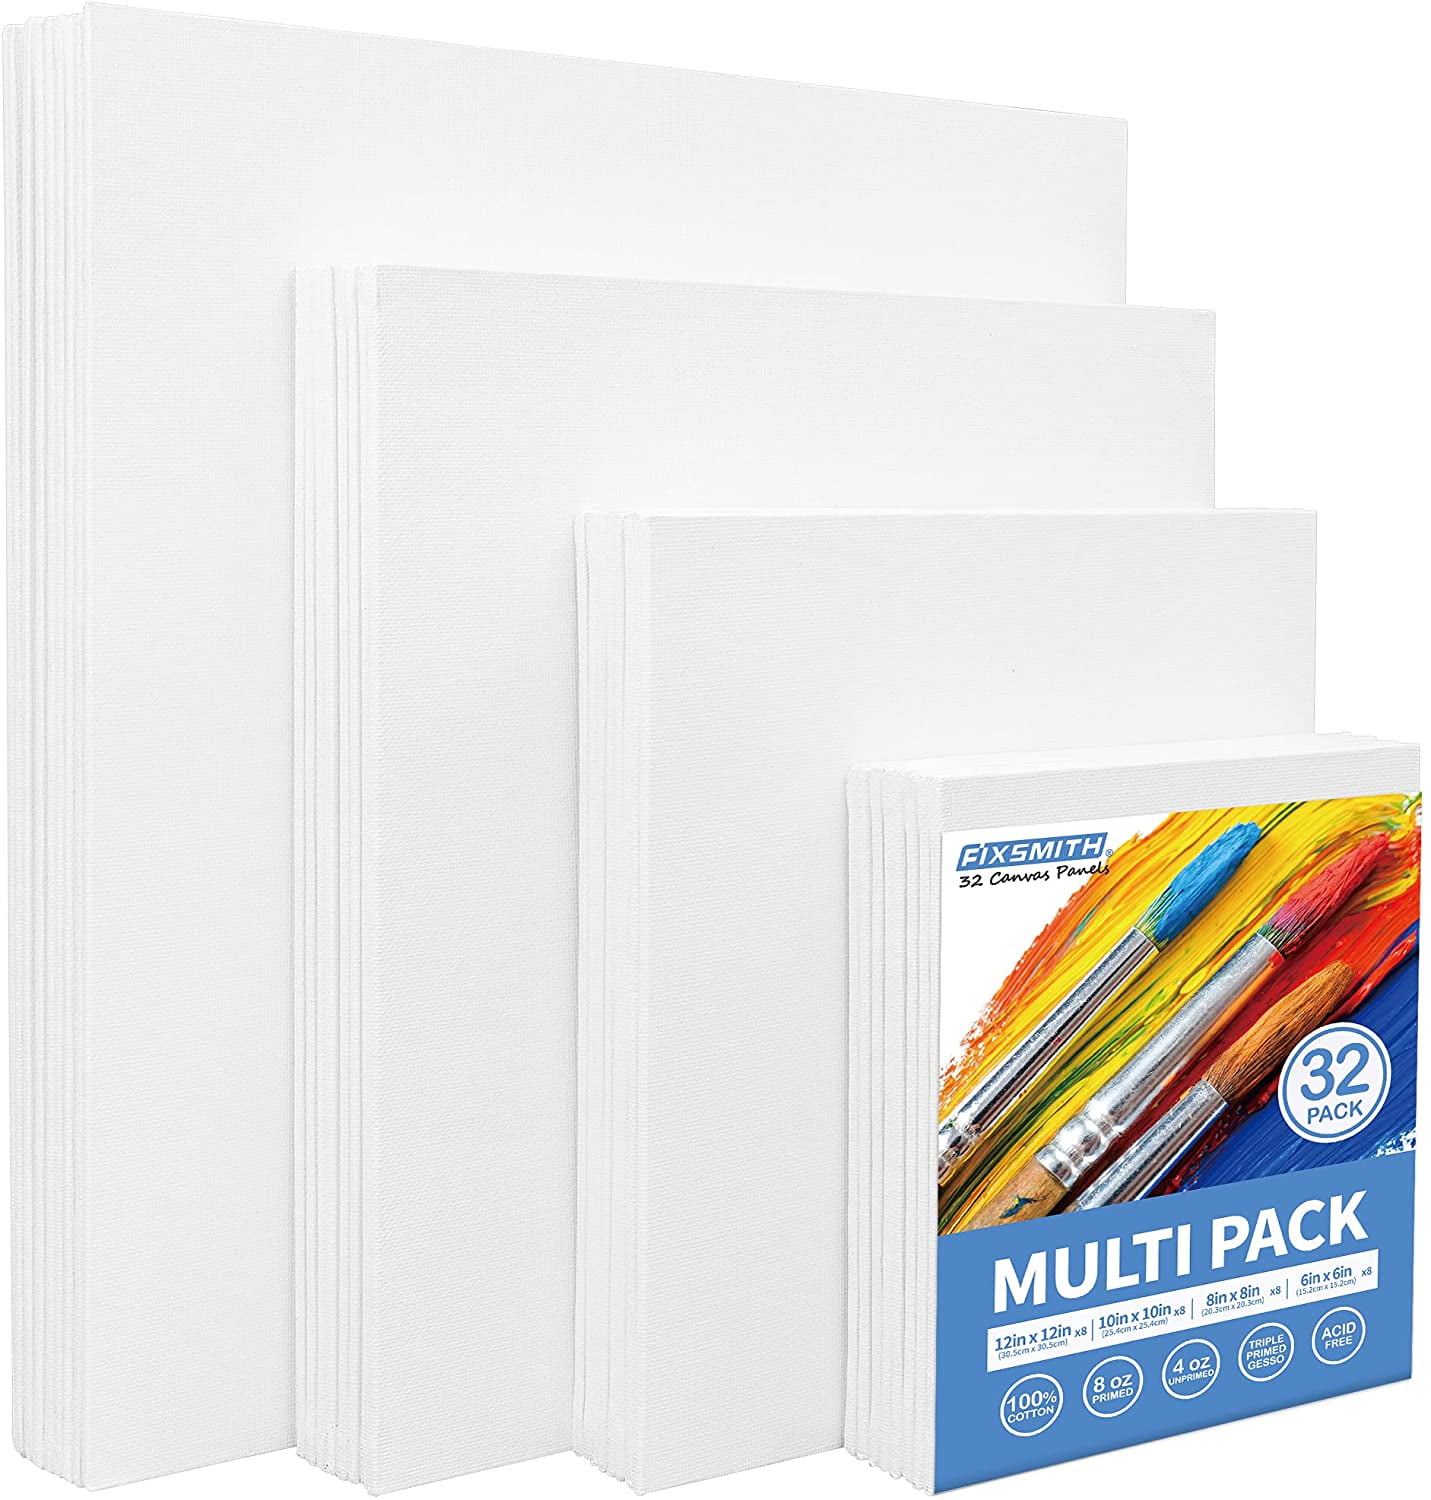 FIXSMITH Painting Canvas Panels Multi Pack- 5x7,8x10,9x12,11x14 (8 of Each),Set of 32,100% Cotton,Primed White Canvases,for Acrylic,Oil,Other Wet or